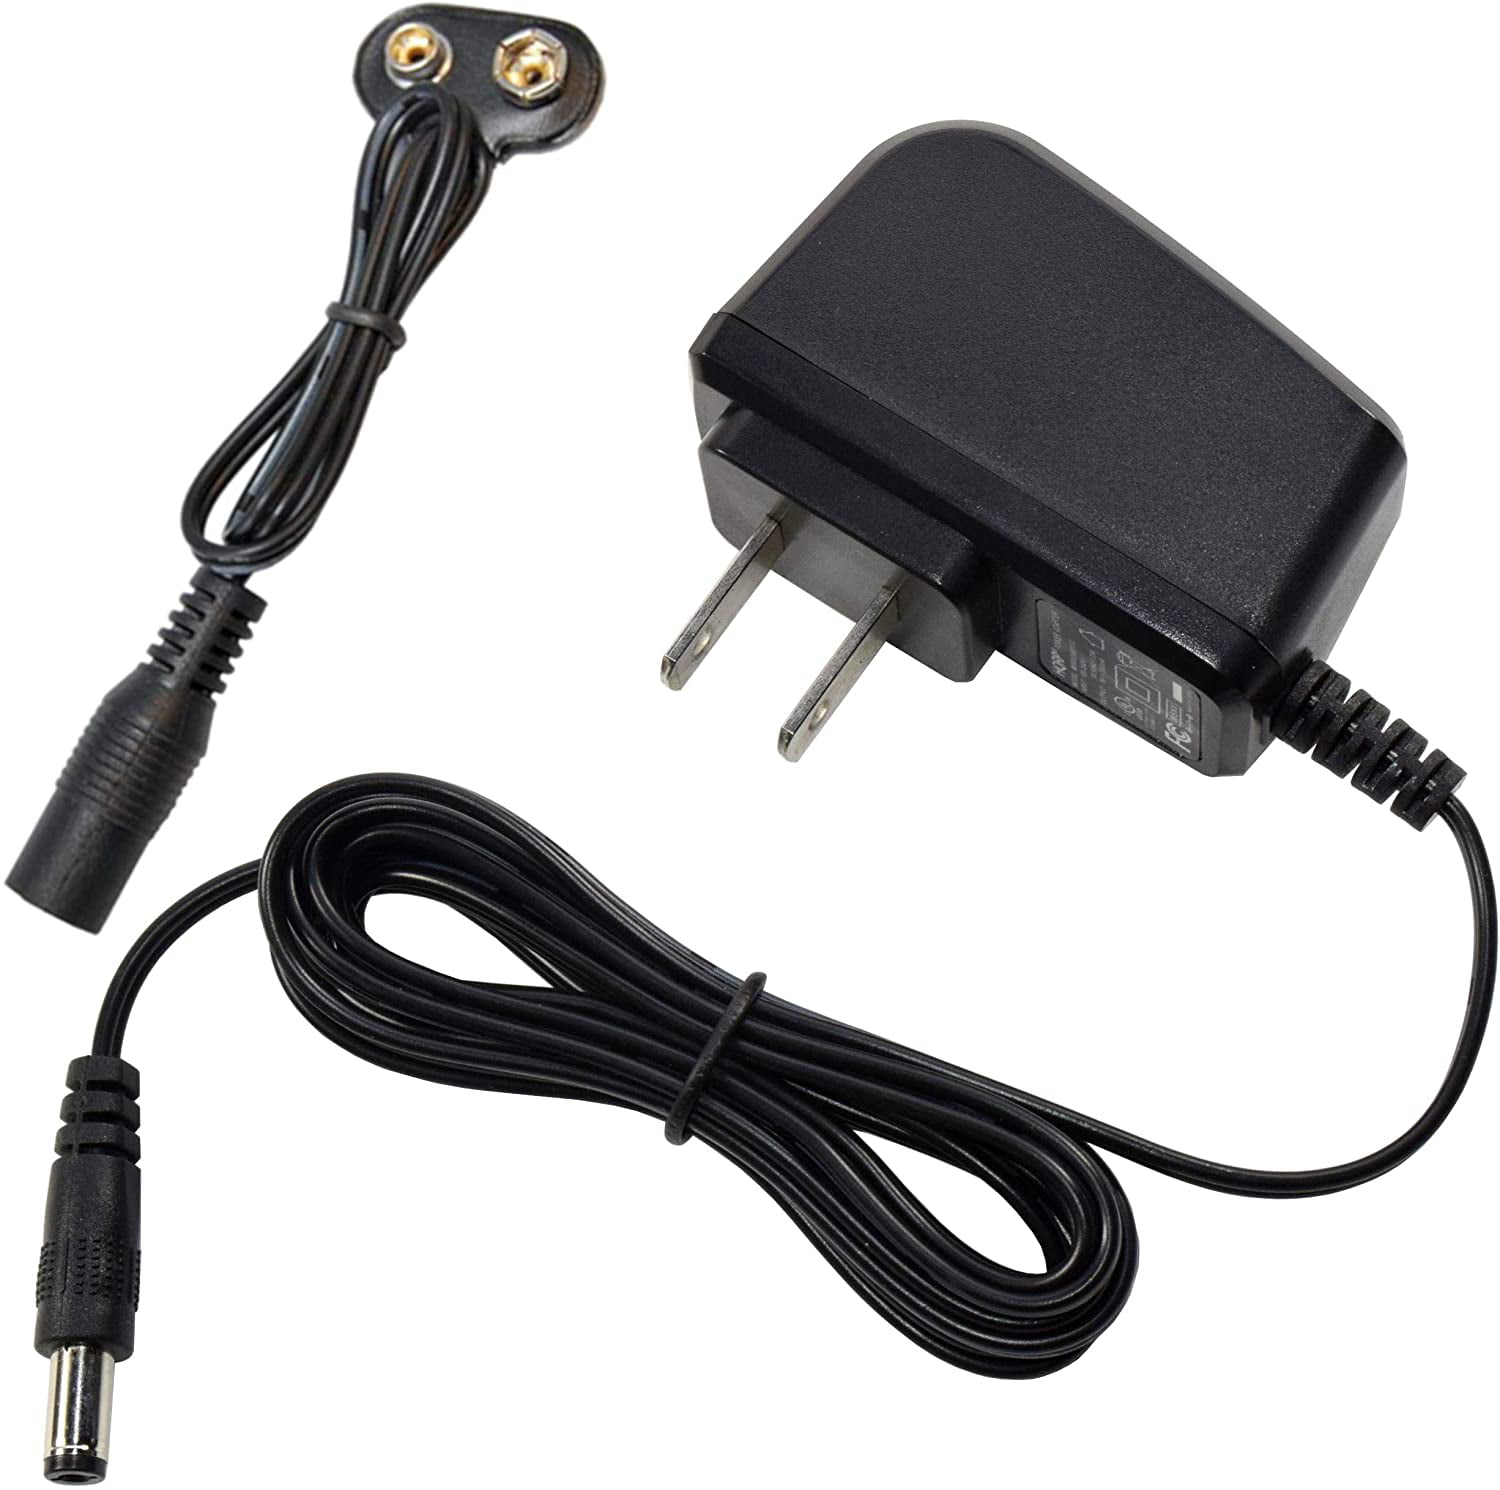 Verdensrekord Guinness Book skorsten Høring HQRP 9V Battery Snap Connector and AC Adapter for American Marine Pinpoint  Conductivity Monitor, Calcium Monitor, Salinity Monitor Clip Connector  Holder Cable Power Supply Cord + Euro Plug Adapter - Walmart.com